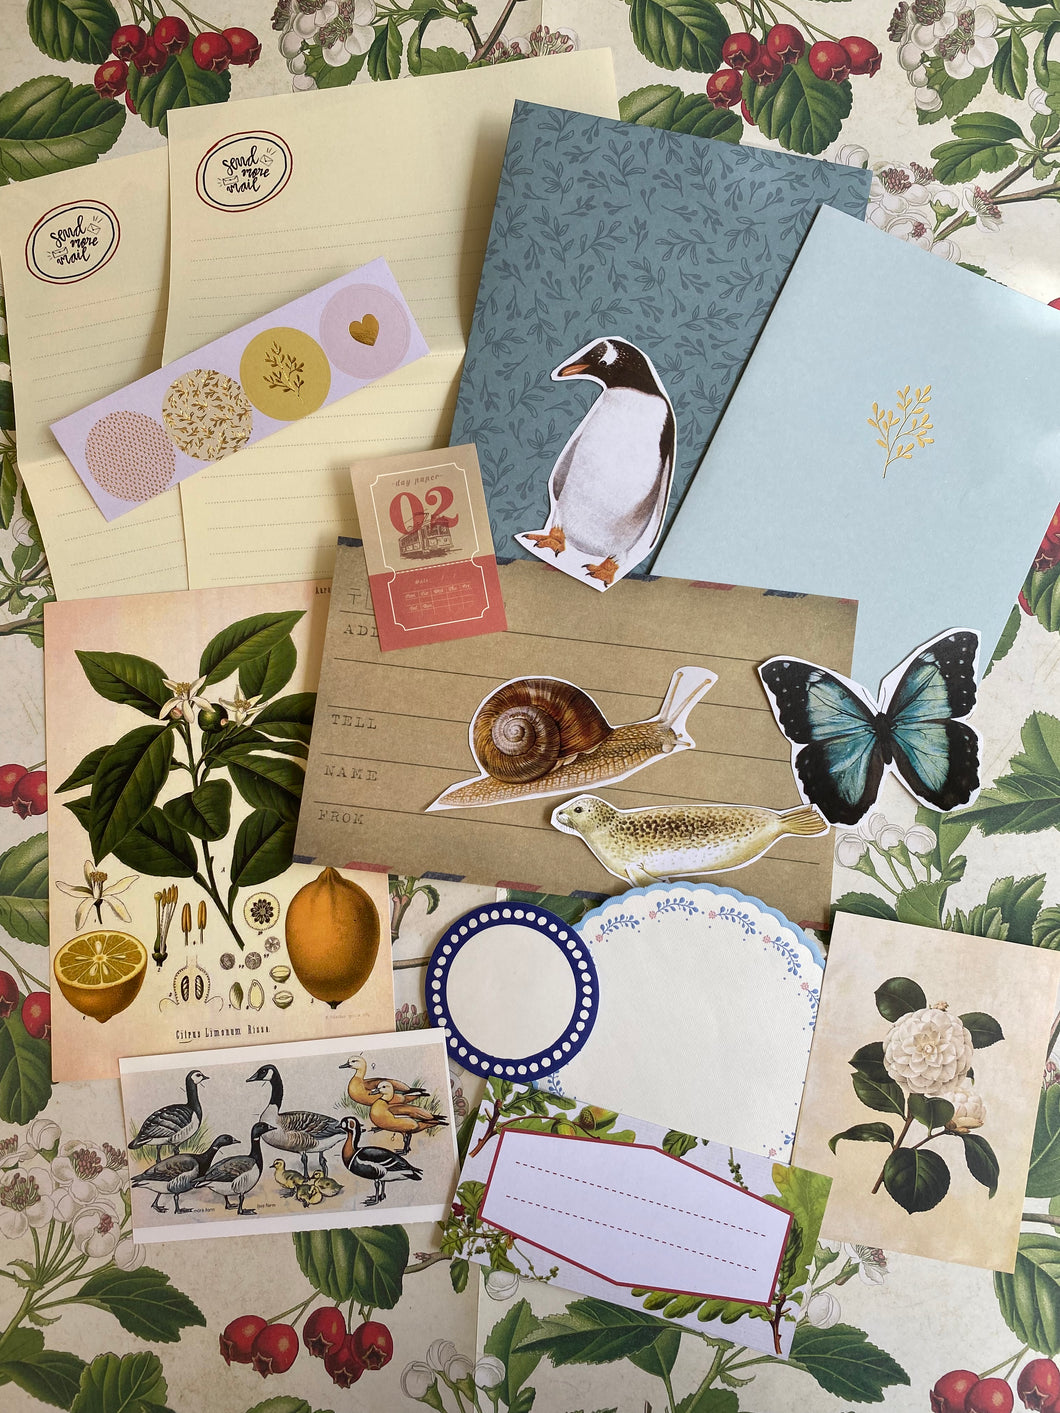 Snail mail kit August 22